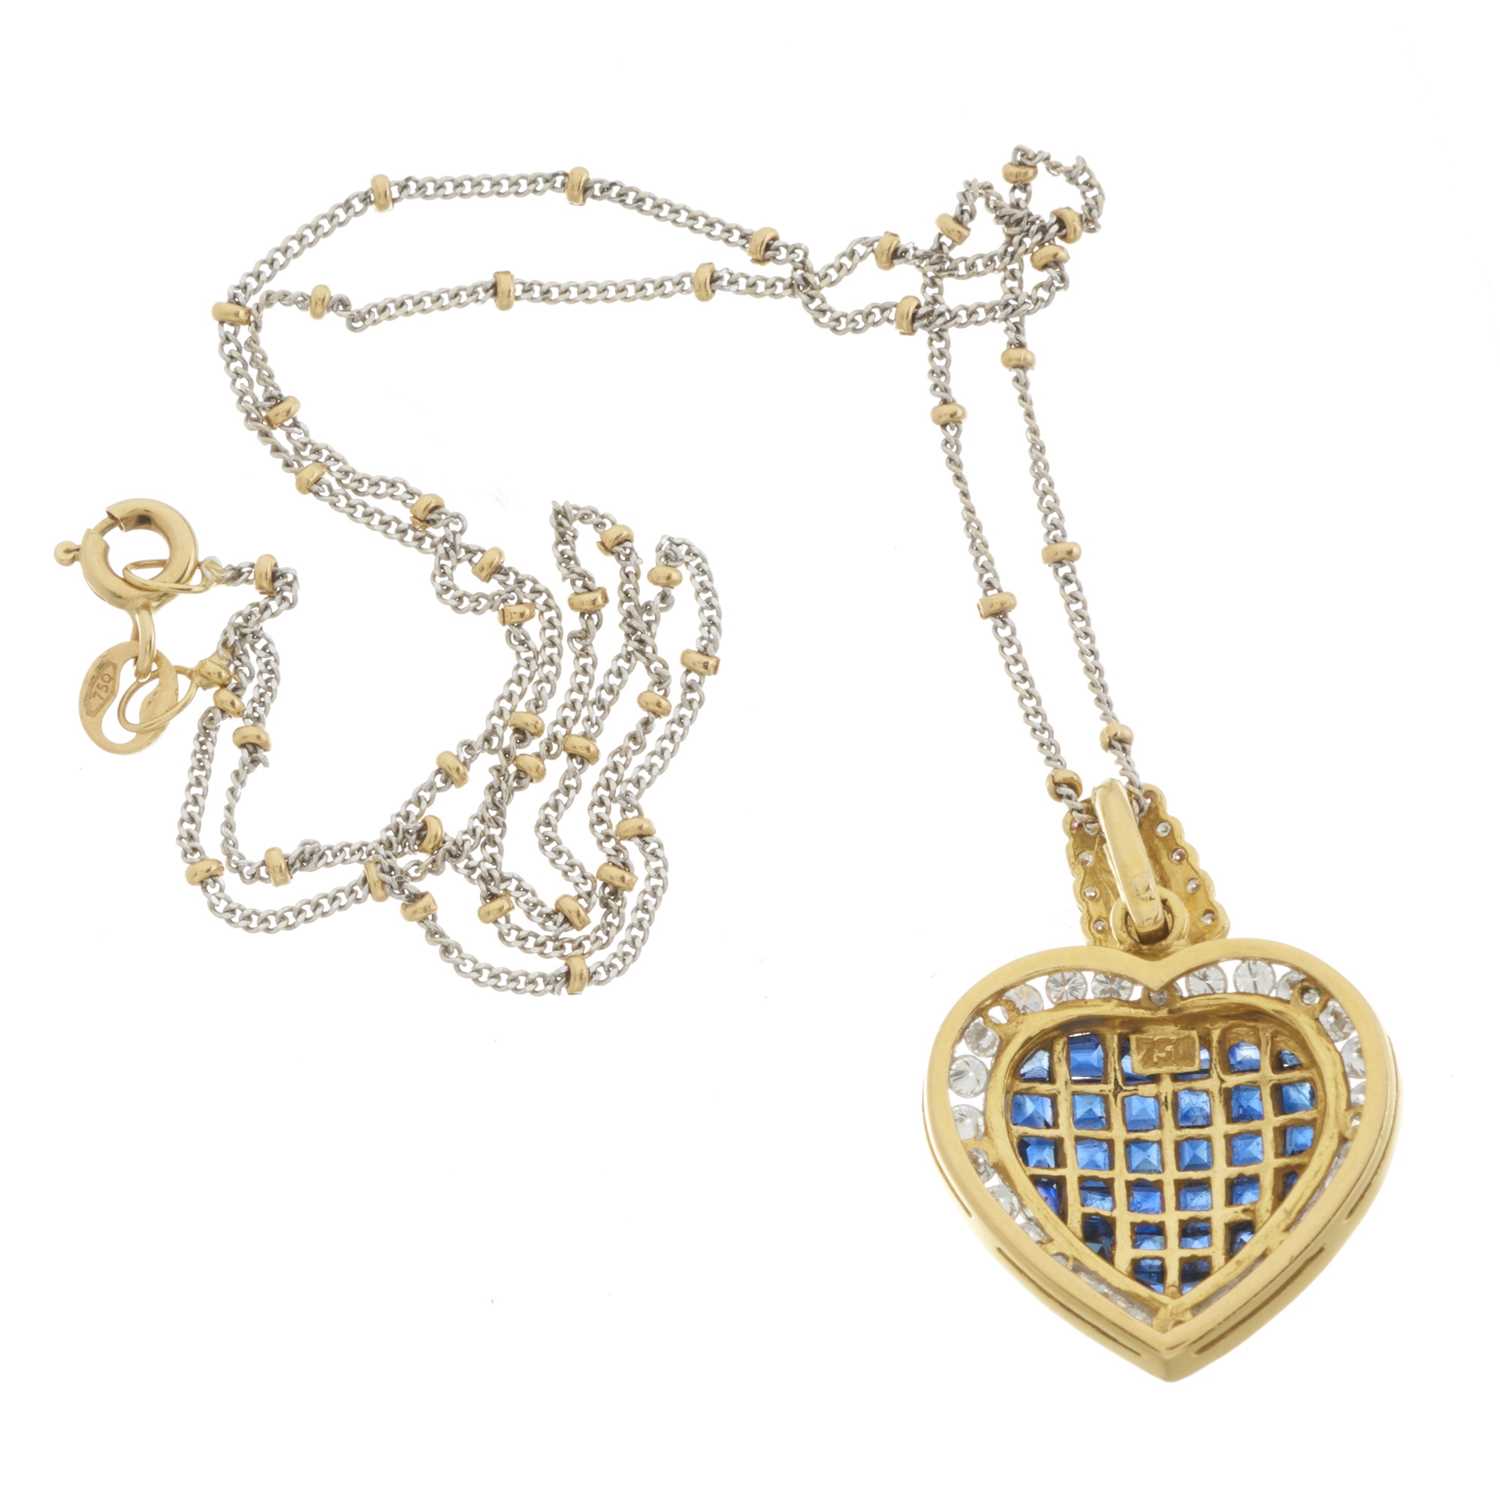 An 18ct gold sapphire and diamond heart necklace - Image 2 of 2